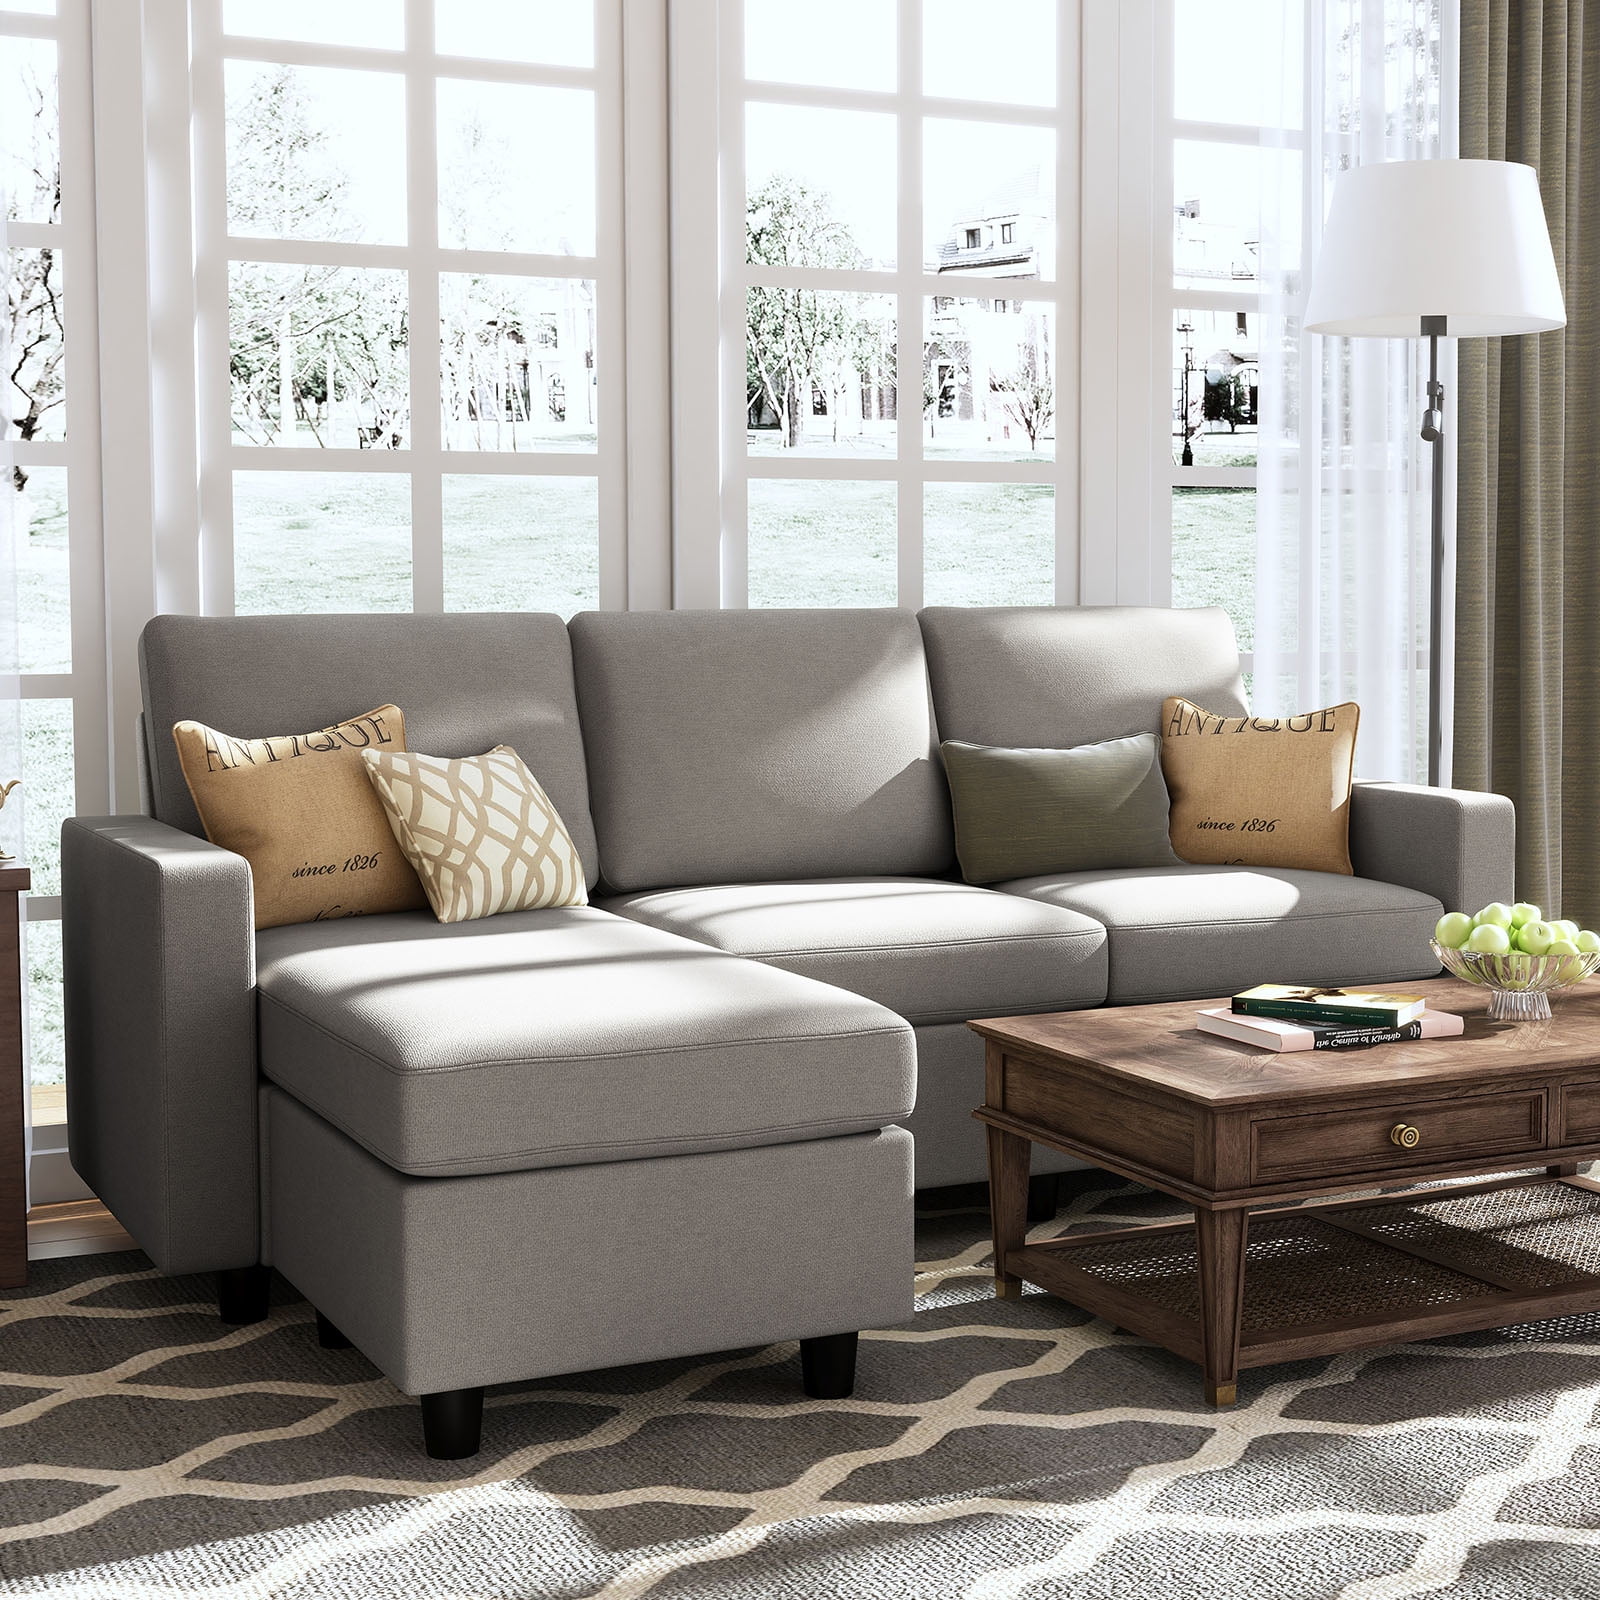 HONBAY Convertible Sectional Sofa L Shaped Couch with Chaise, Light Gray